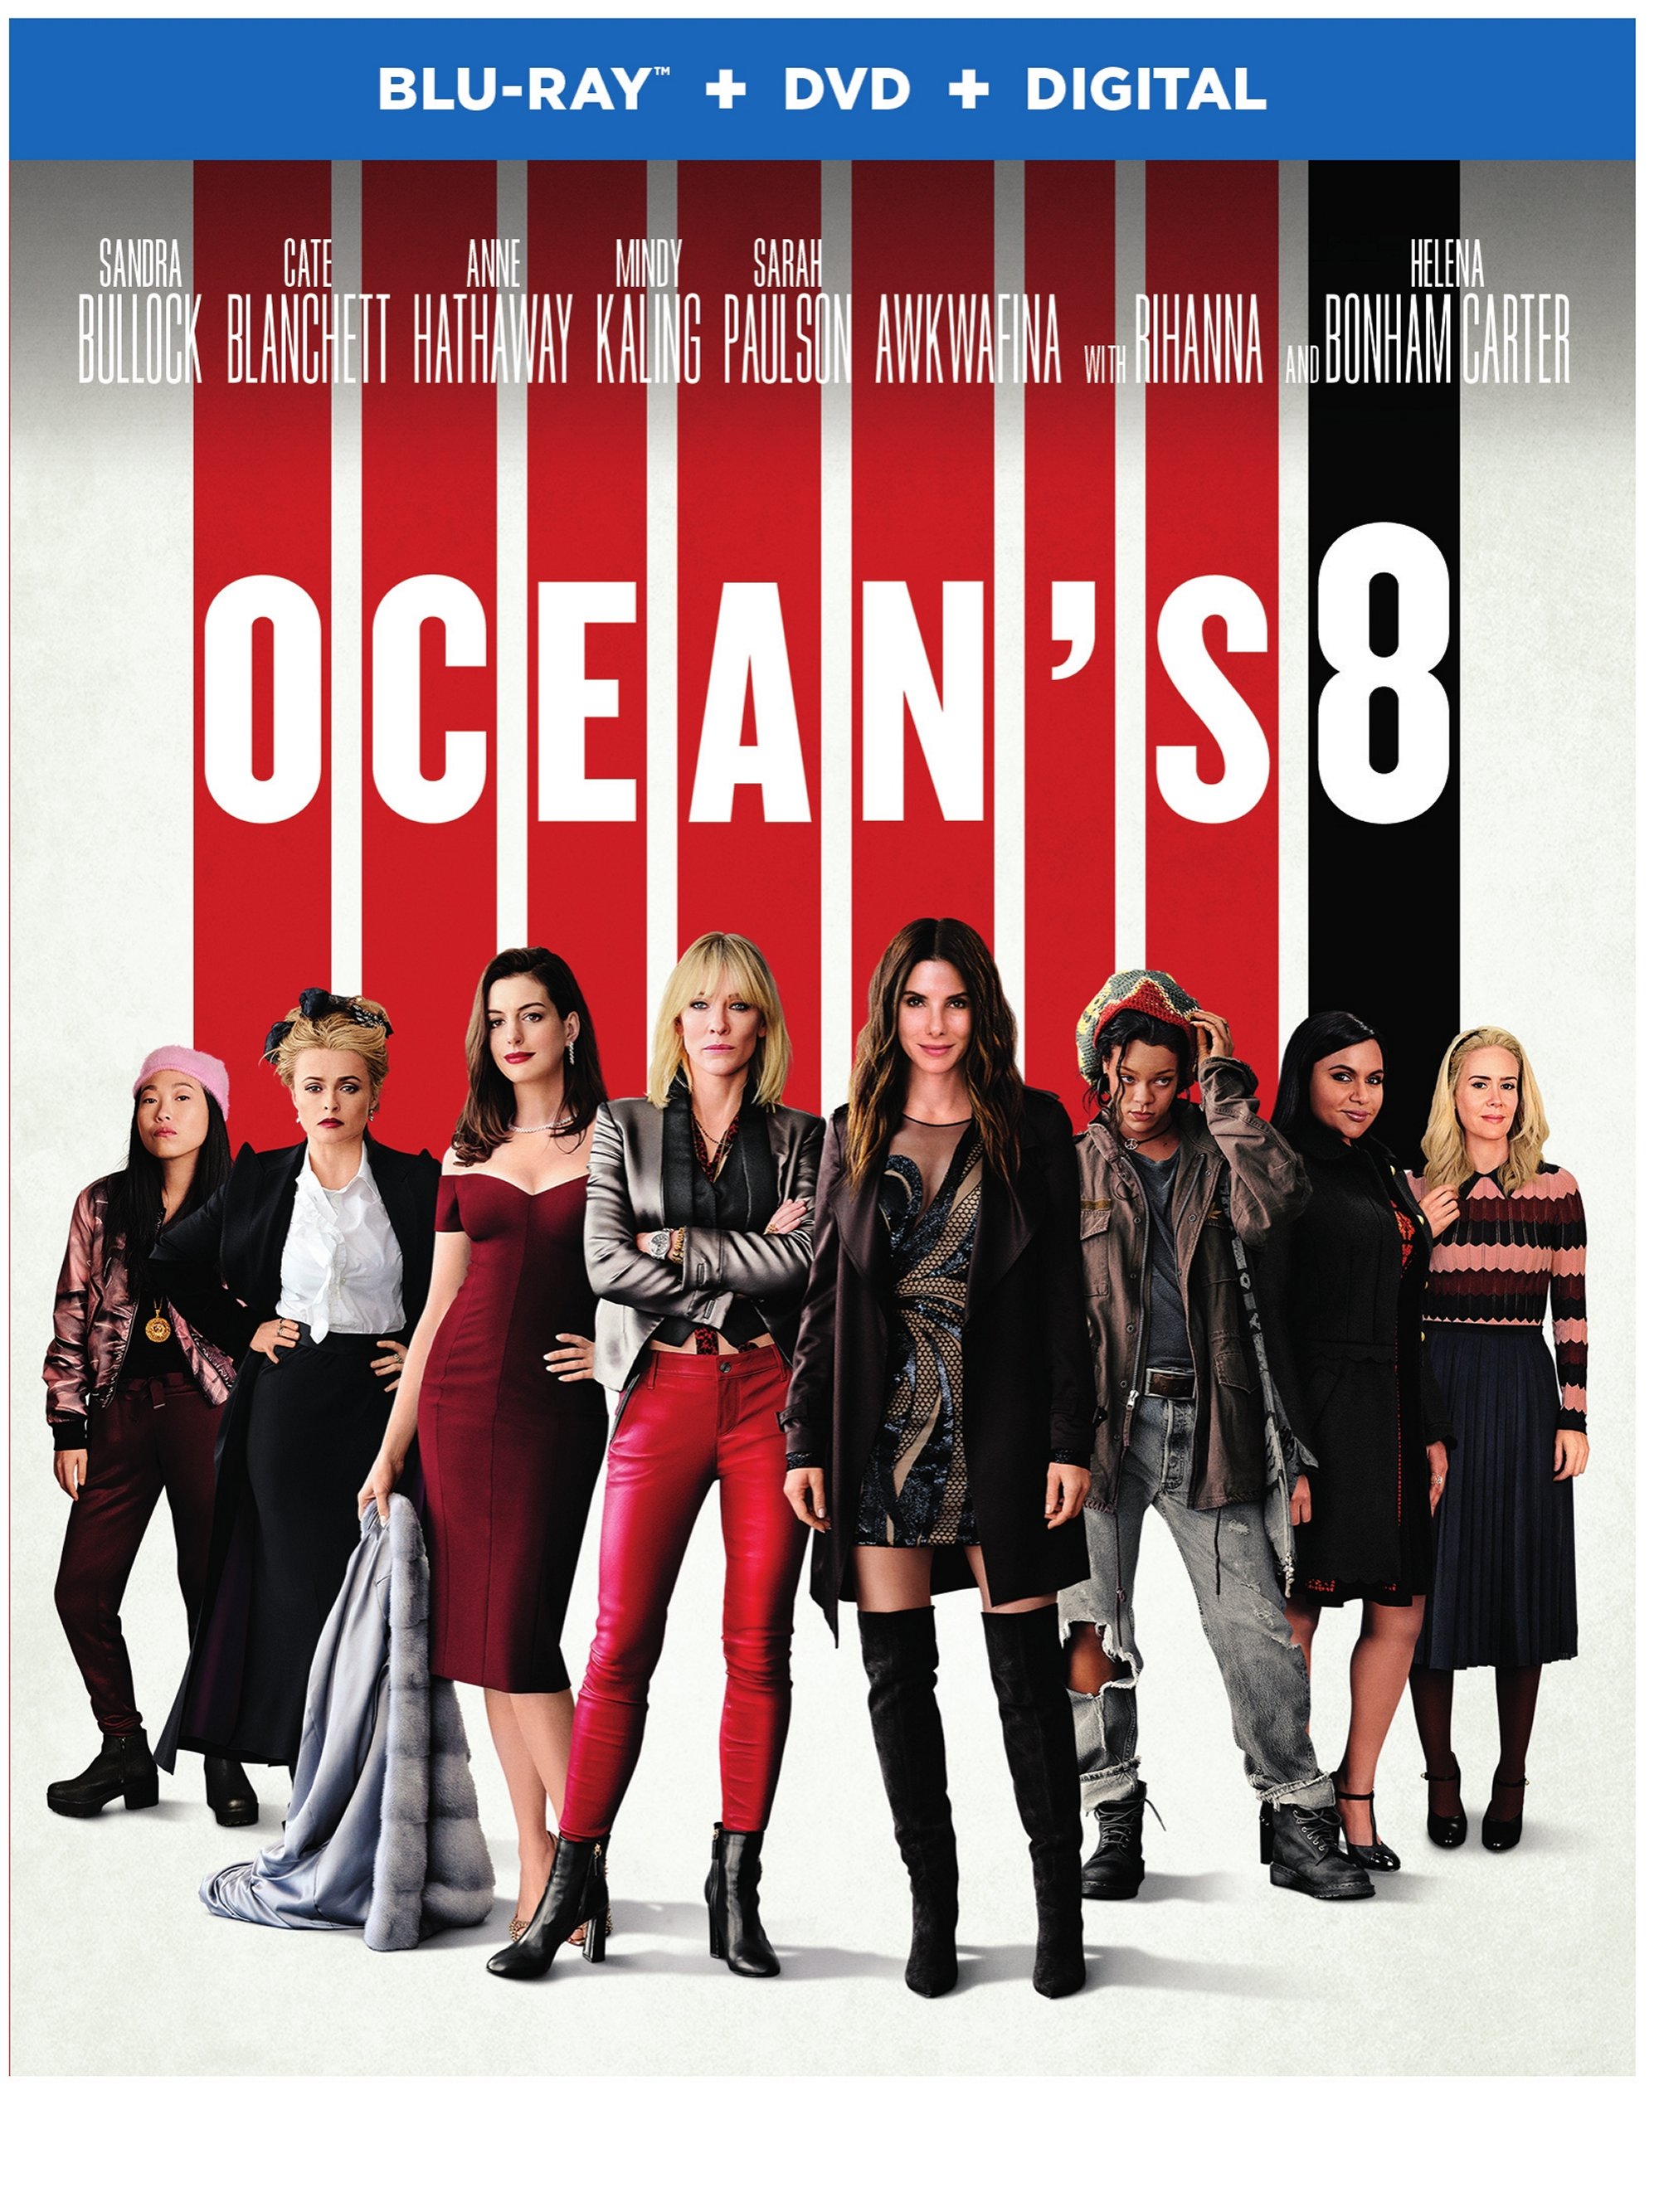 Ocean's 8 Blu-Ray Combo Pack cover (Warner Bros. Home Entertainment)